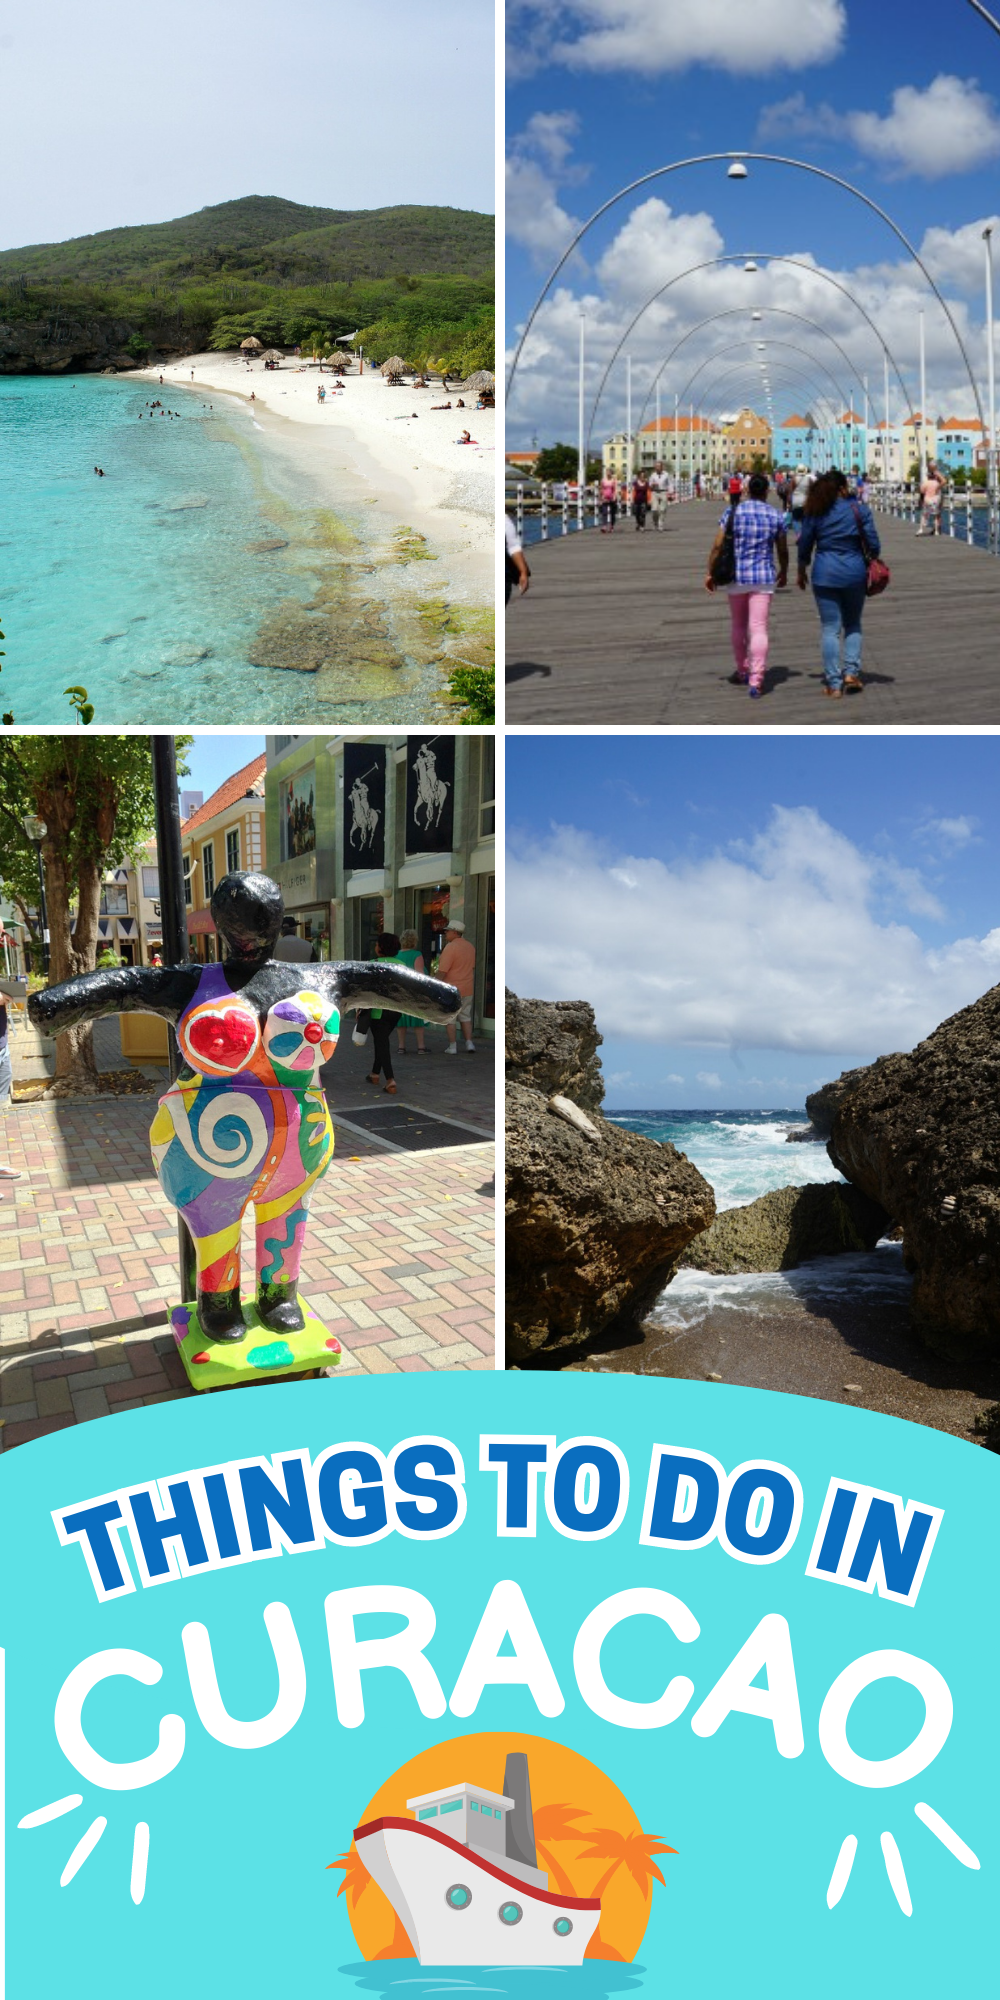 Cruise Port Curacao Things to Do 